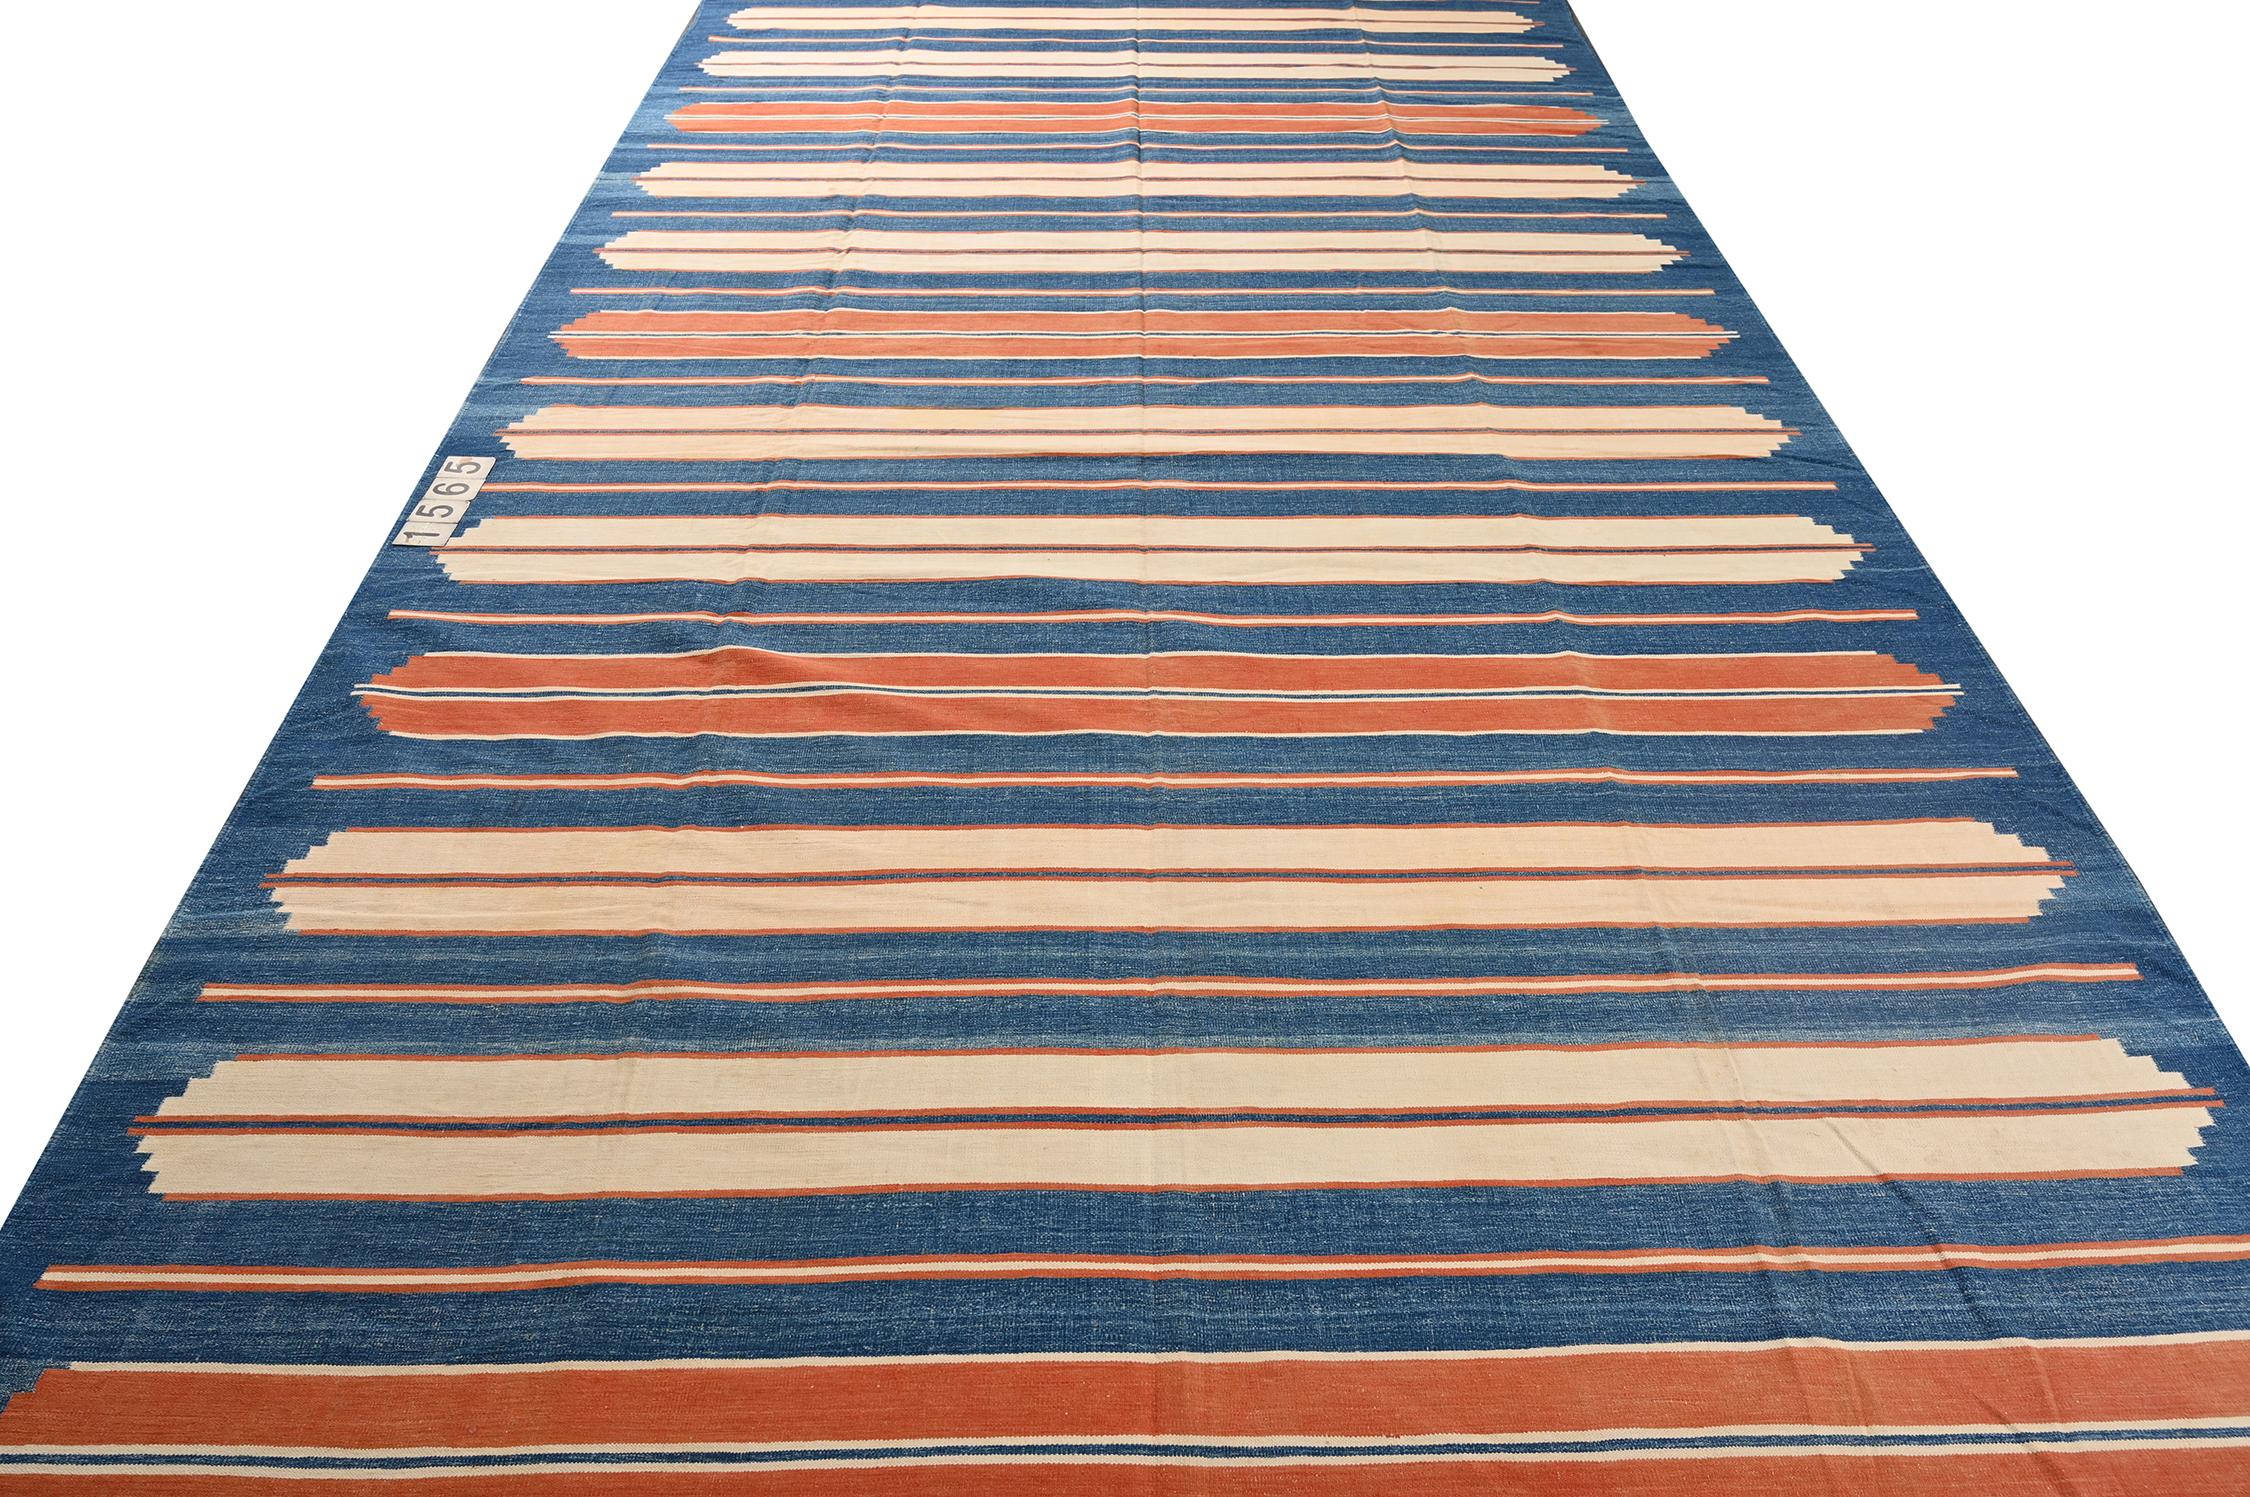 This vintage 9x15 Dhurrie is an exciting new entry in Rug & Kilim's esteemed flat weave collection. Handwoven in cotton, it originates from India circa 1950-1960. 

Further on the Design:

This flat weave unfurls in navy blue with orange and